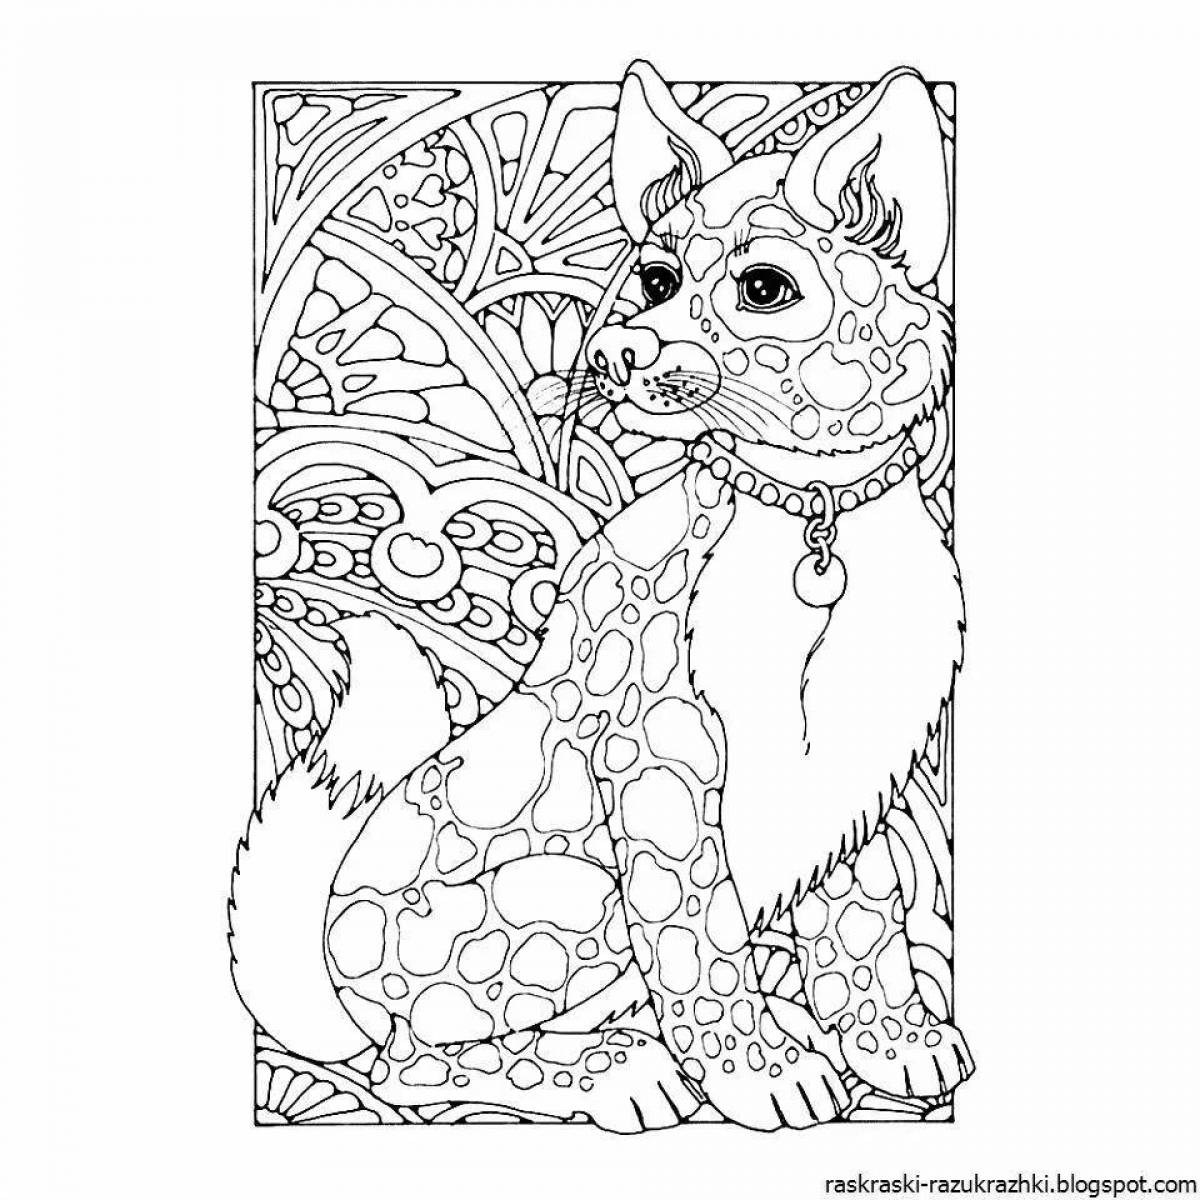 Major coloring book for girls 9-10 years old